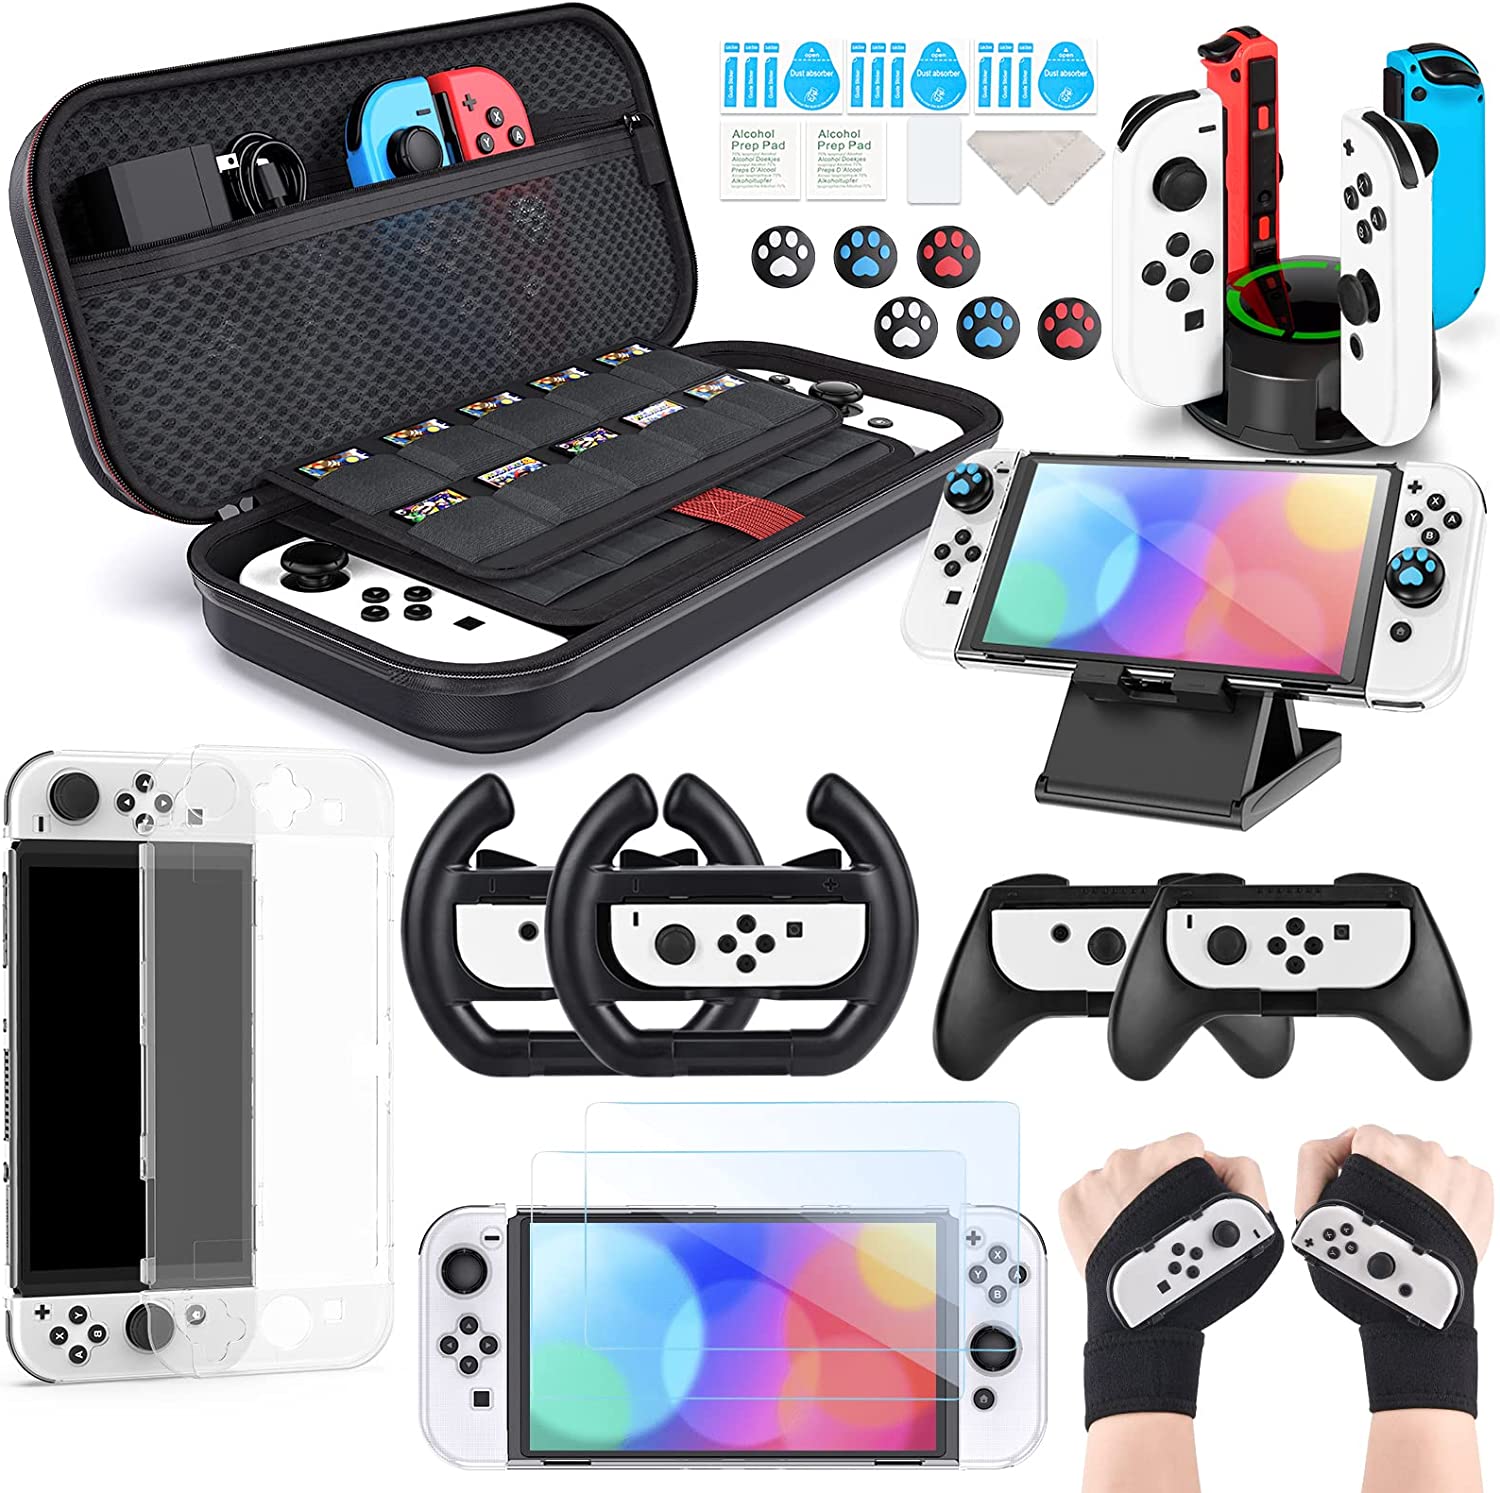 innoAura Hard Carrying Case for Switch OLED with 20 Accessories